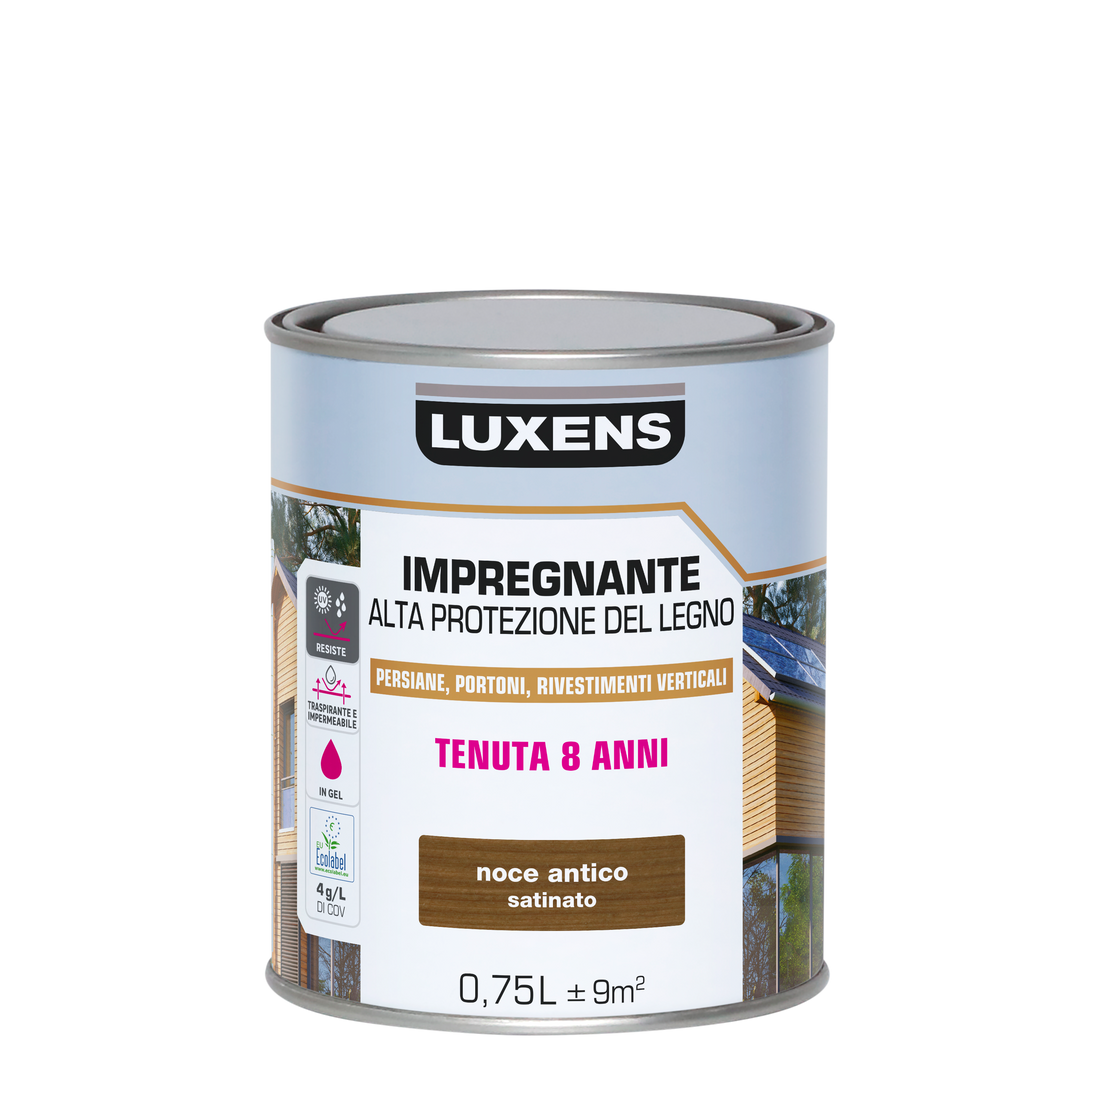 LUXENS HIGH-PROTECTION DARK WALNUT WATER-BASED WOOD PRESERVATIVE 750 ML